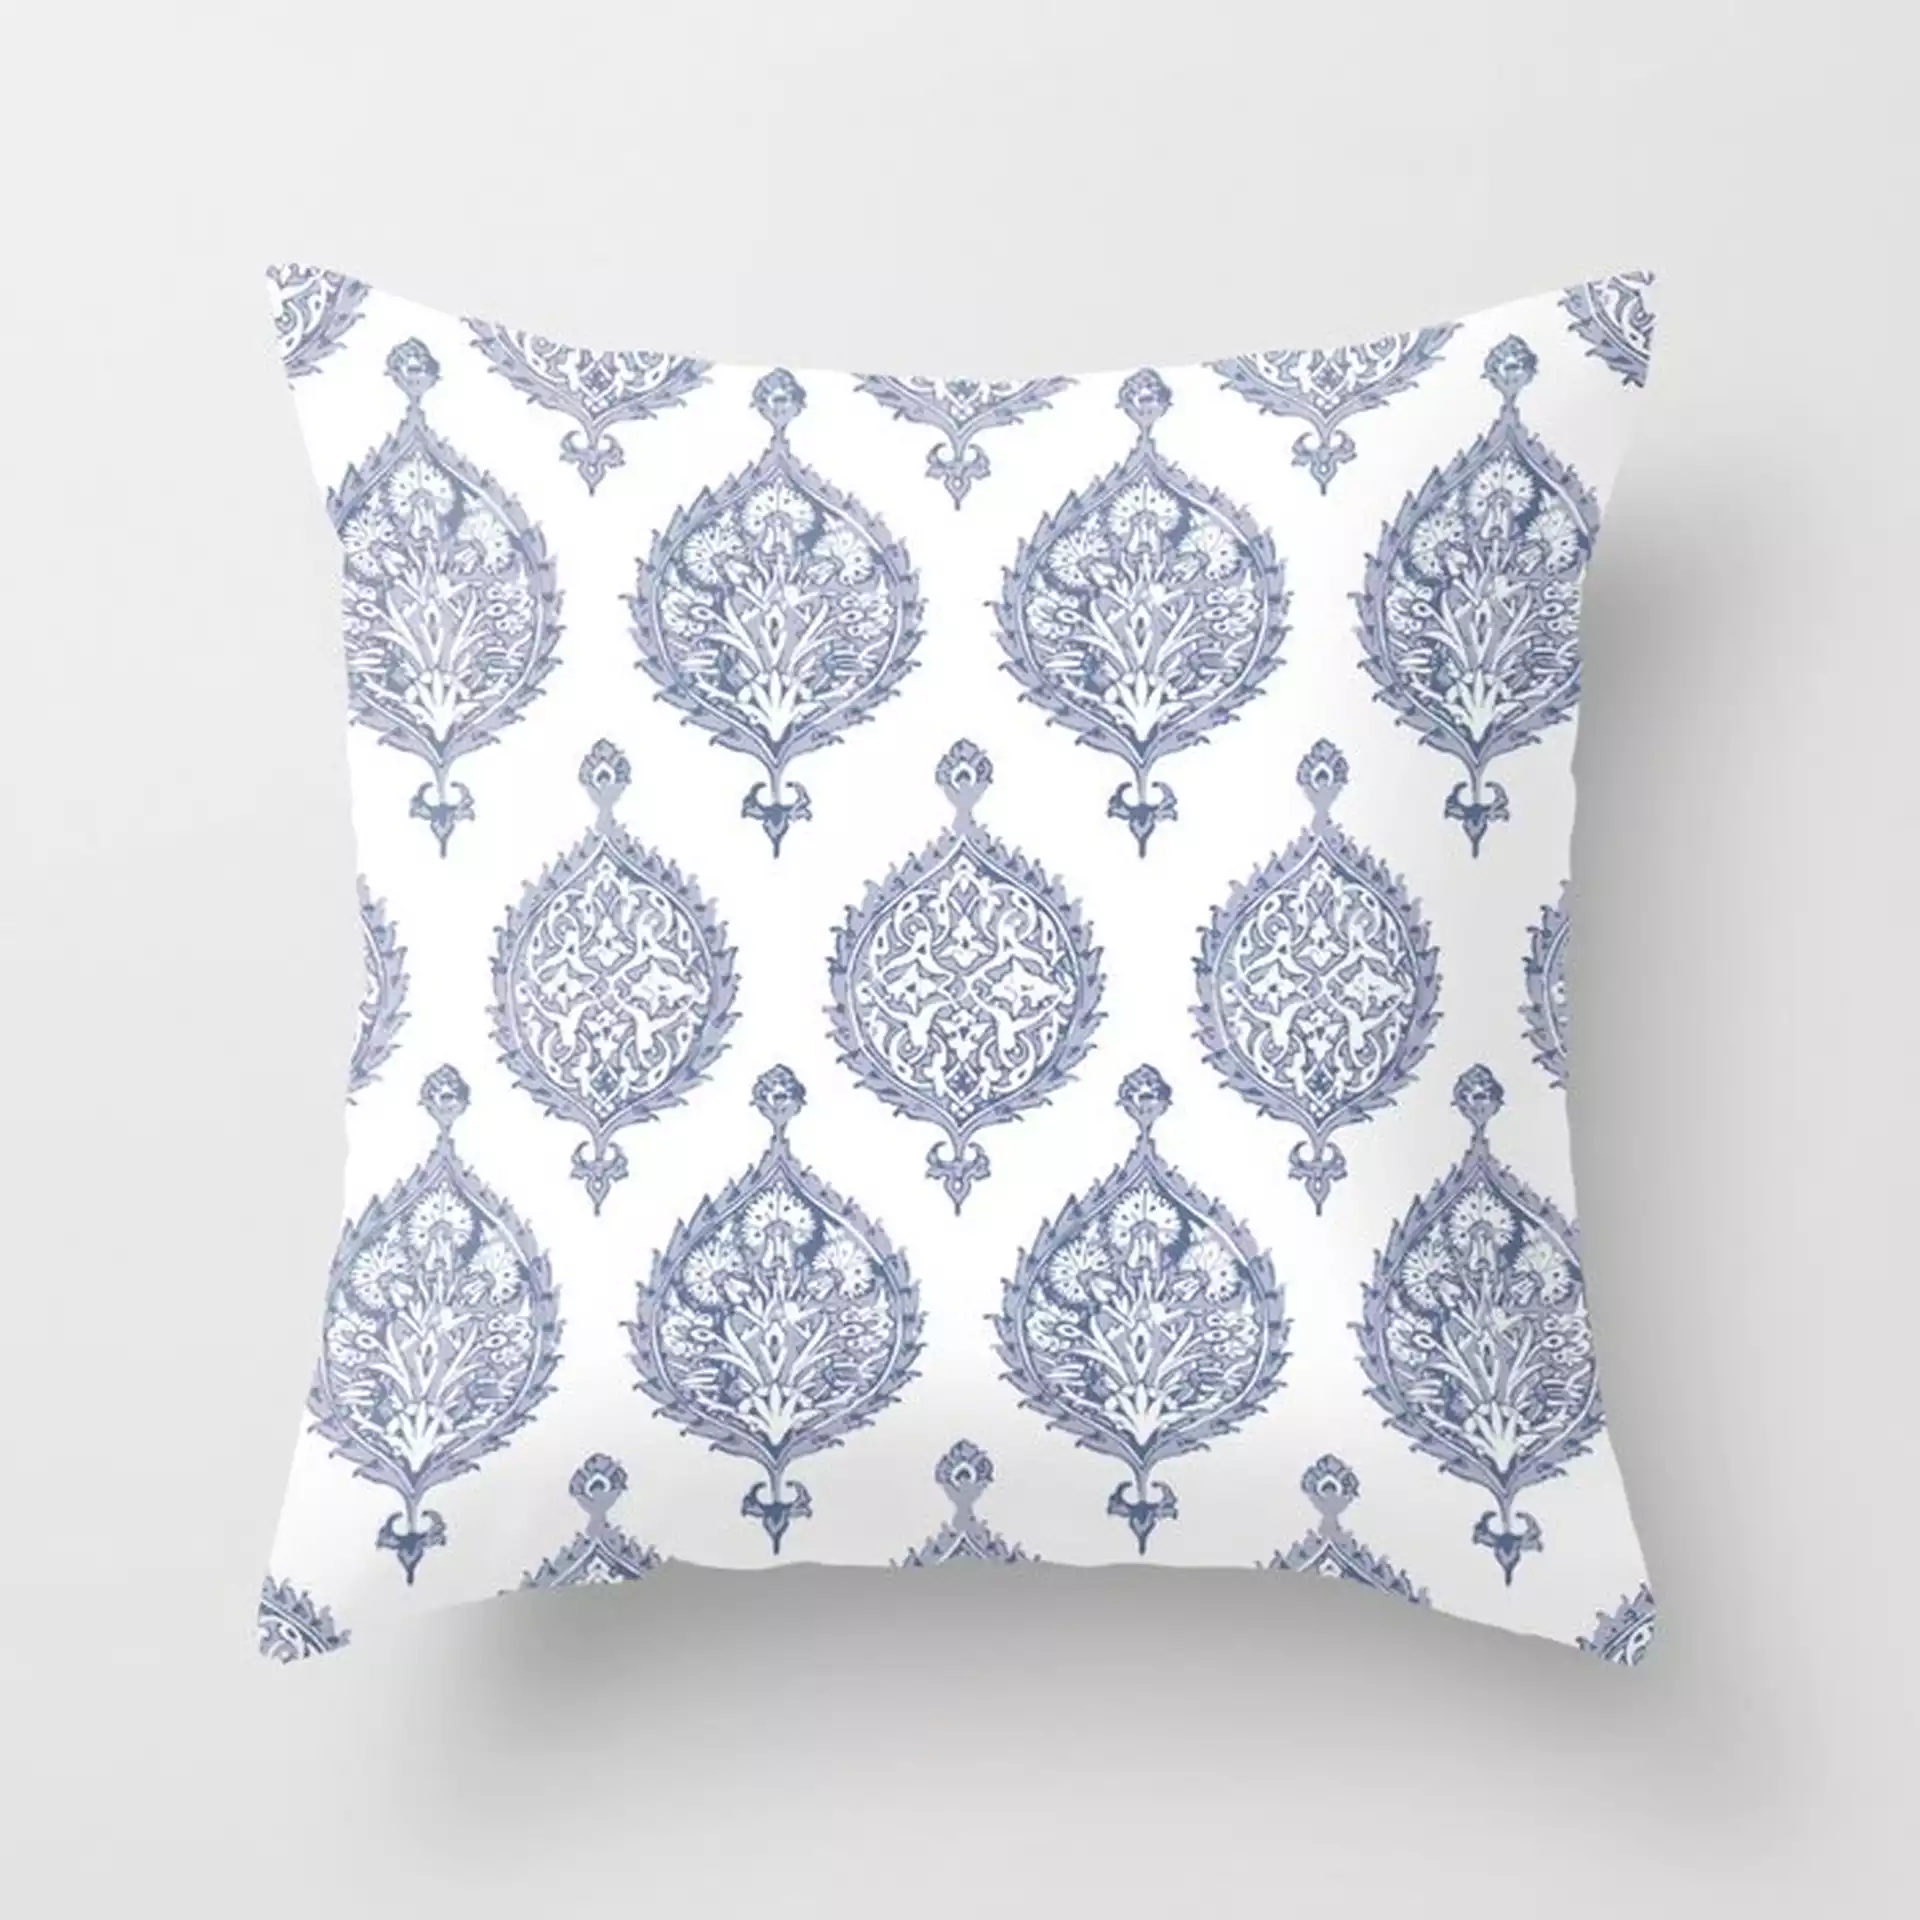 Endana Medallion Print In Periwinkle Couch Throw Pillow by Becky Bailey - Cover (18" x 18") with pillow insert - Indoor Pillow